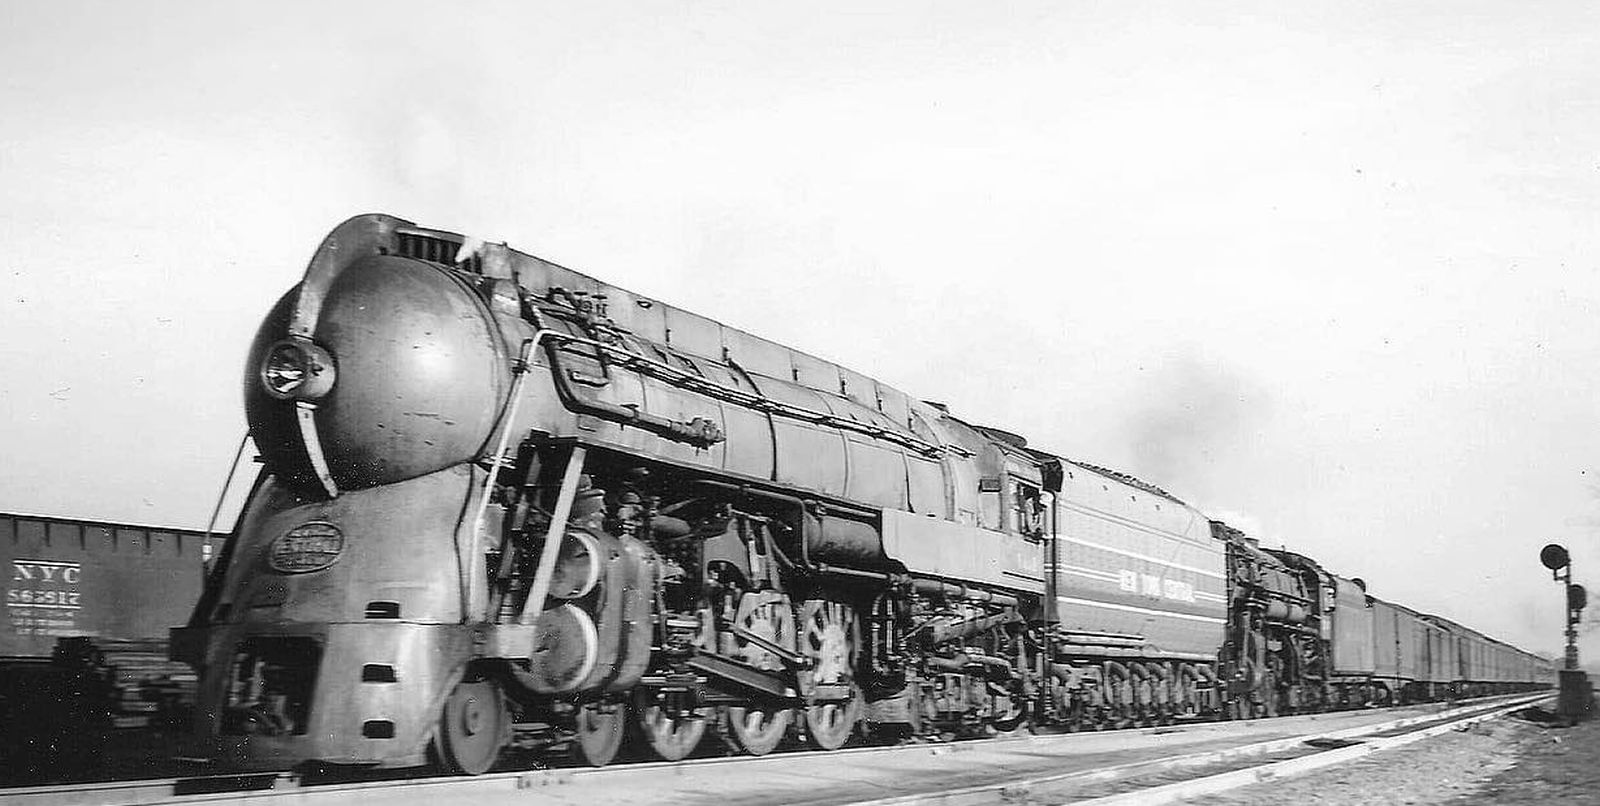 J-3a No. 5448 streamlined in front of another loco in Chicago